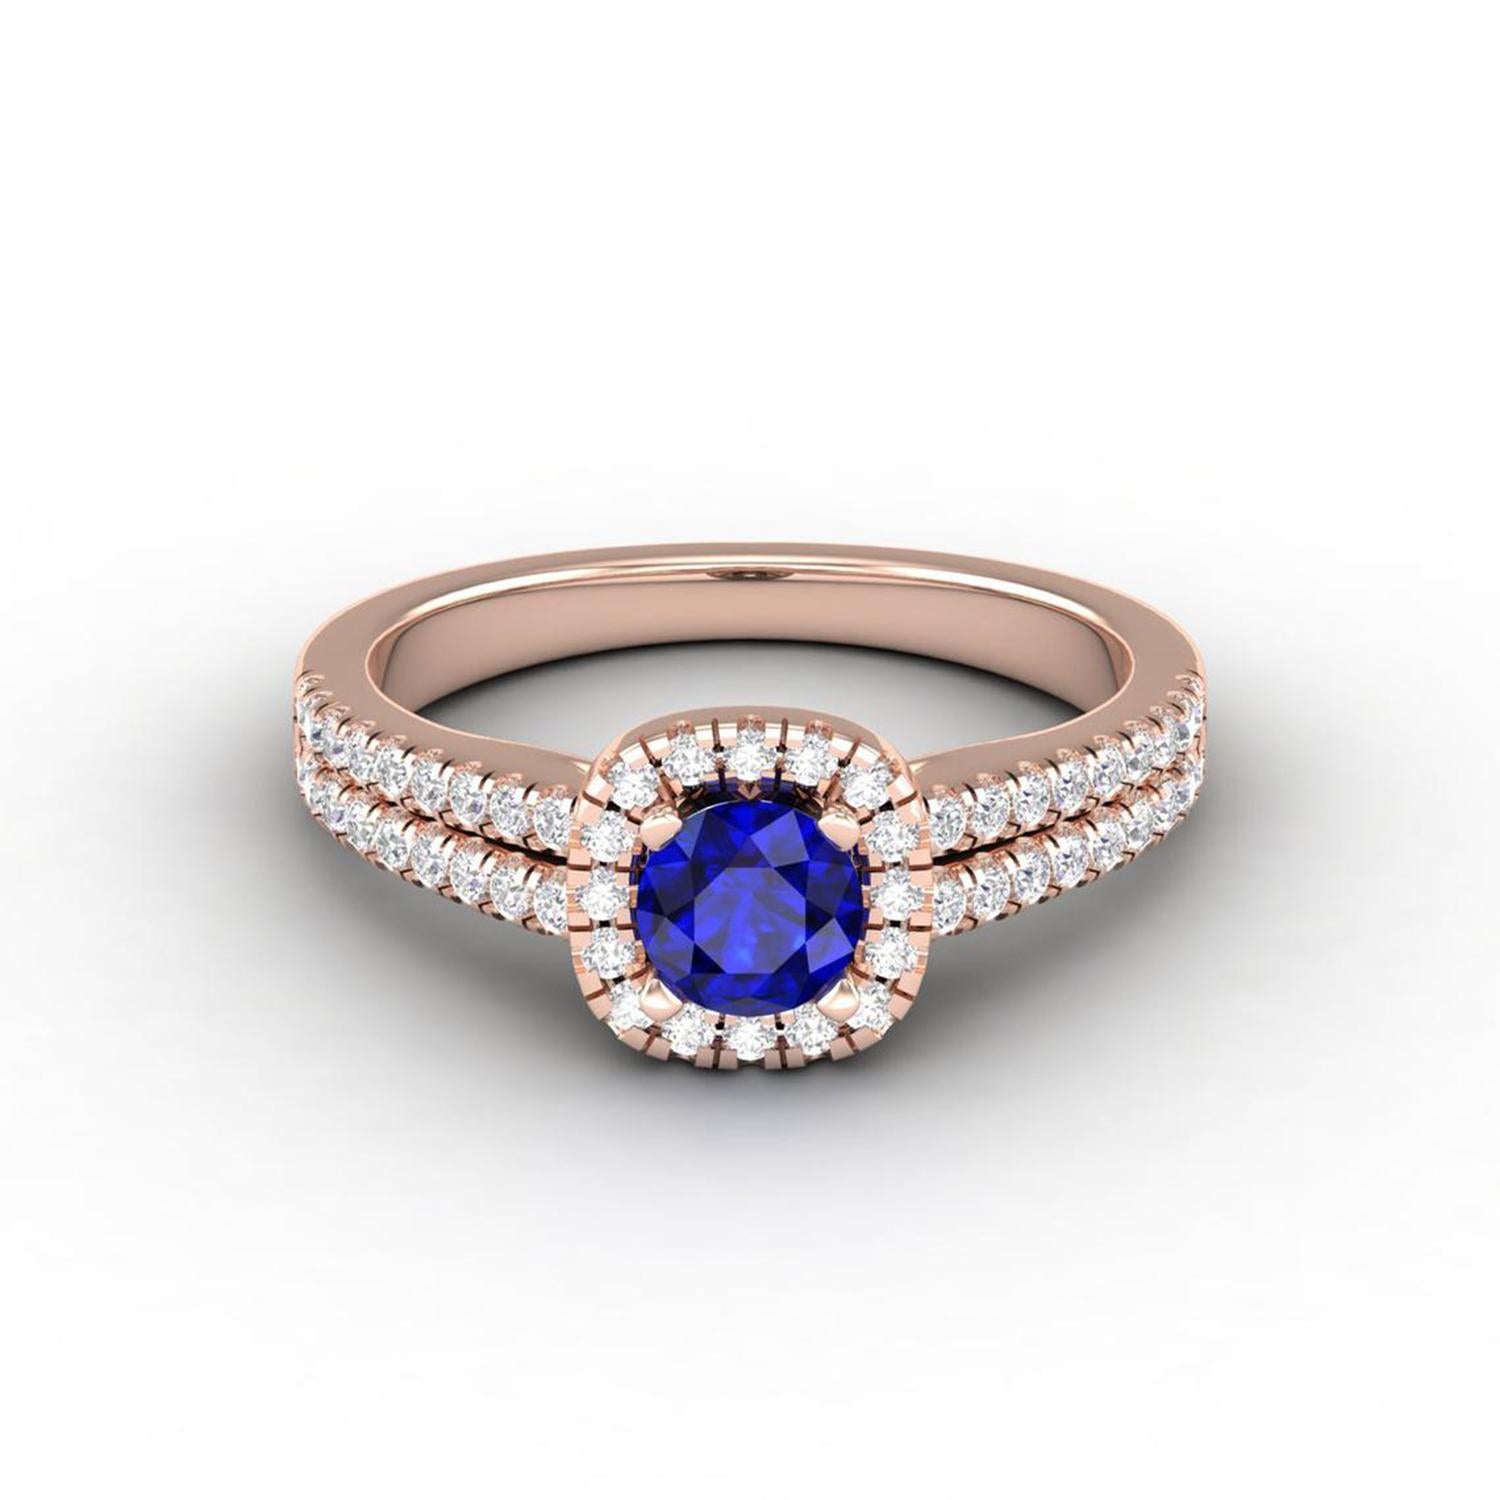 Women's or Men's 14 K Gold Sapphire Round Ring / Round Diamond Ring / Solitaire Ring For Sale